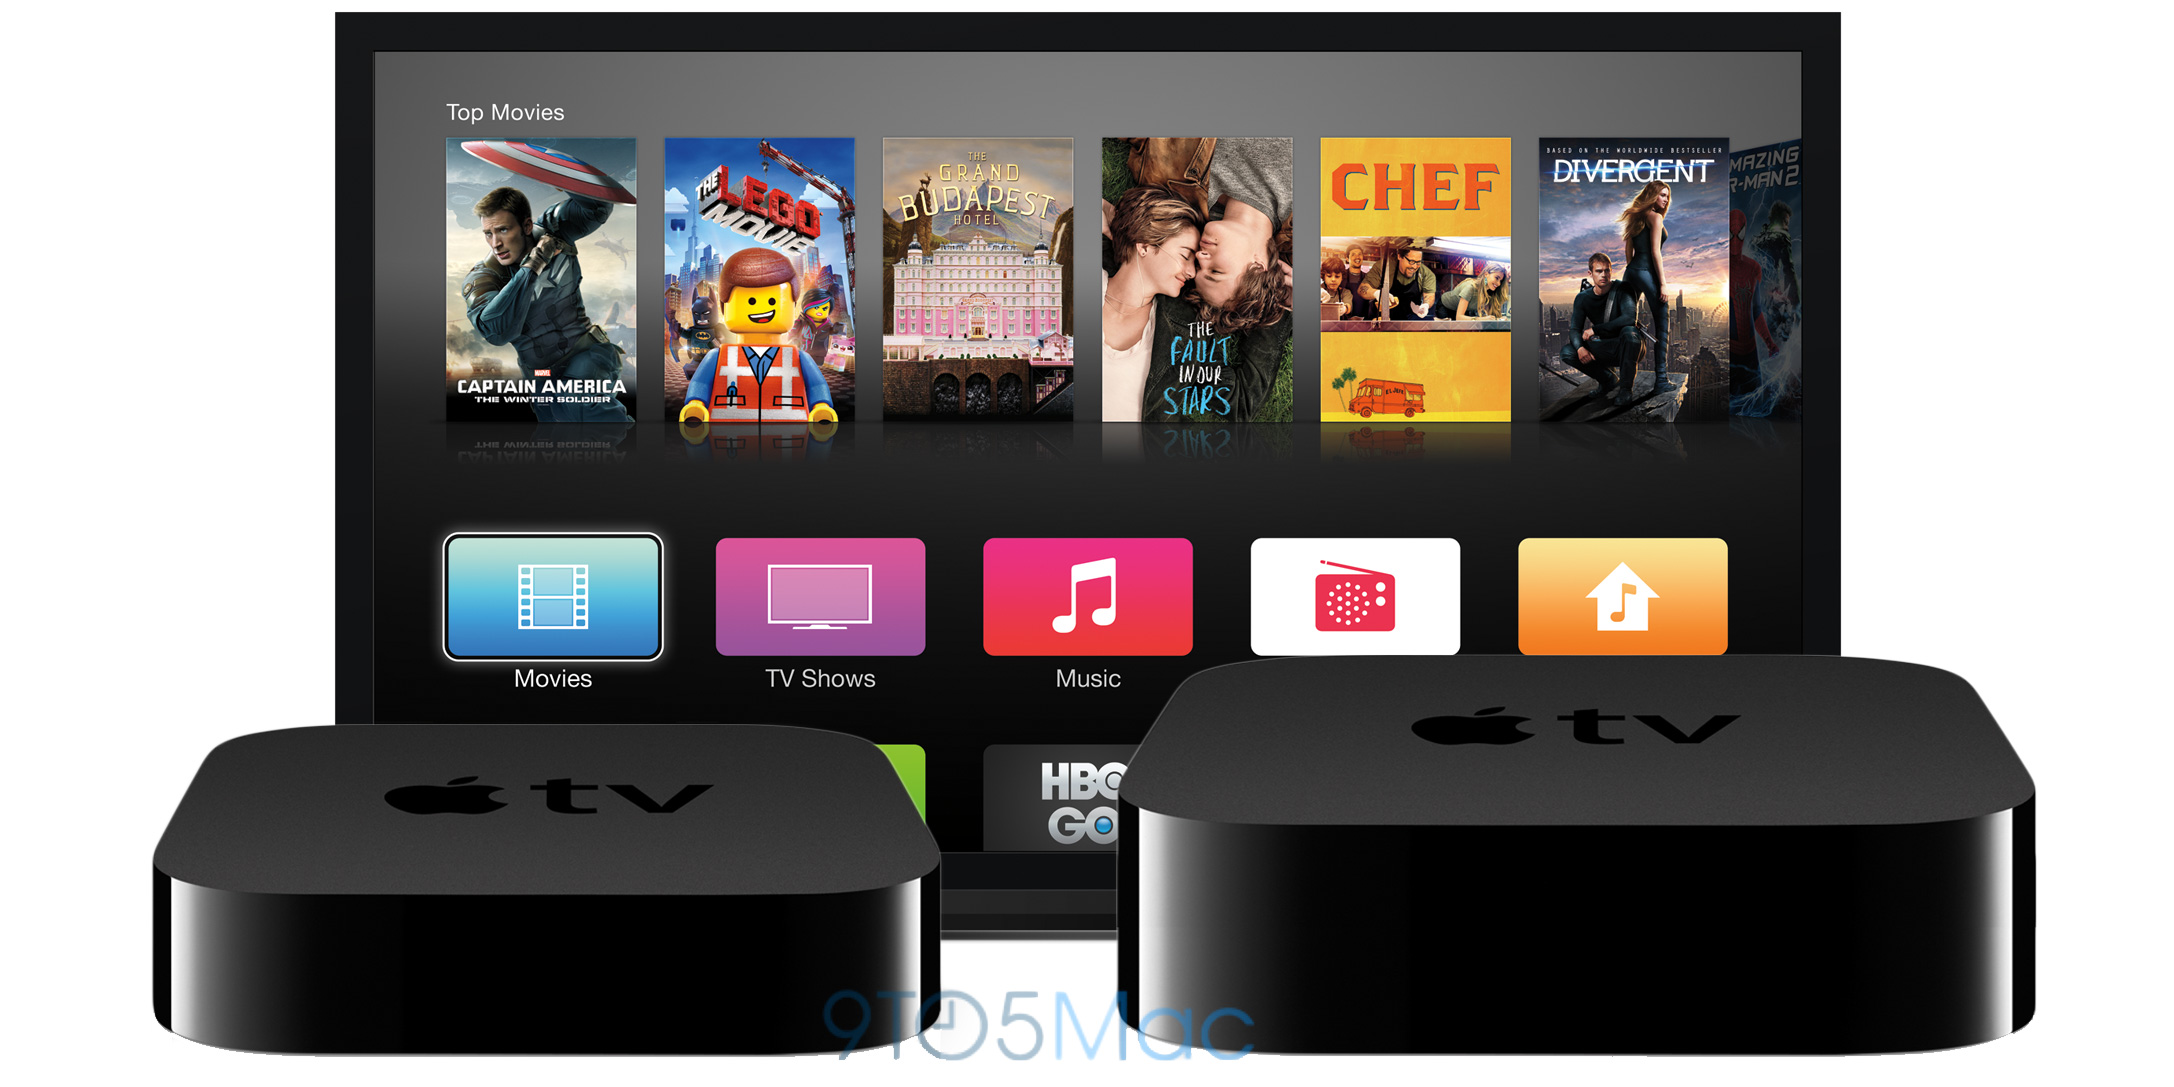 Download crypto tv for apple tv 0.00148004 btc value